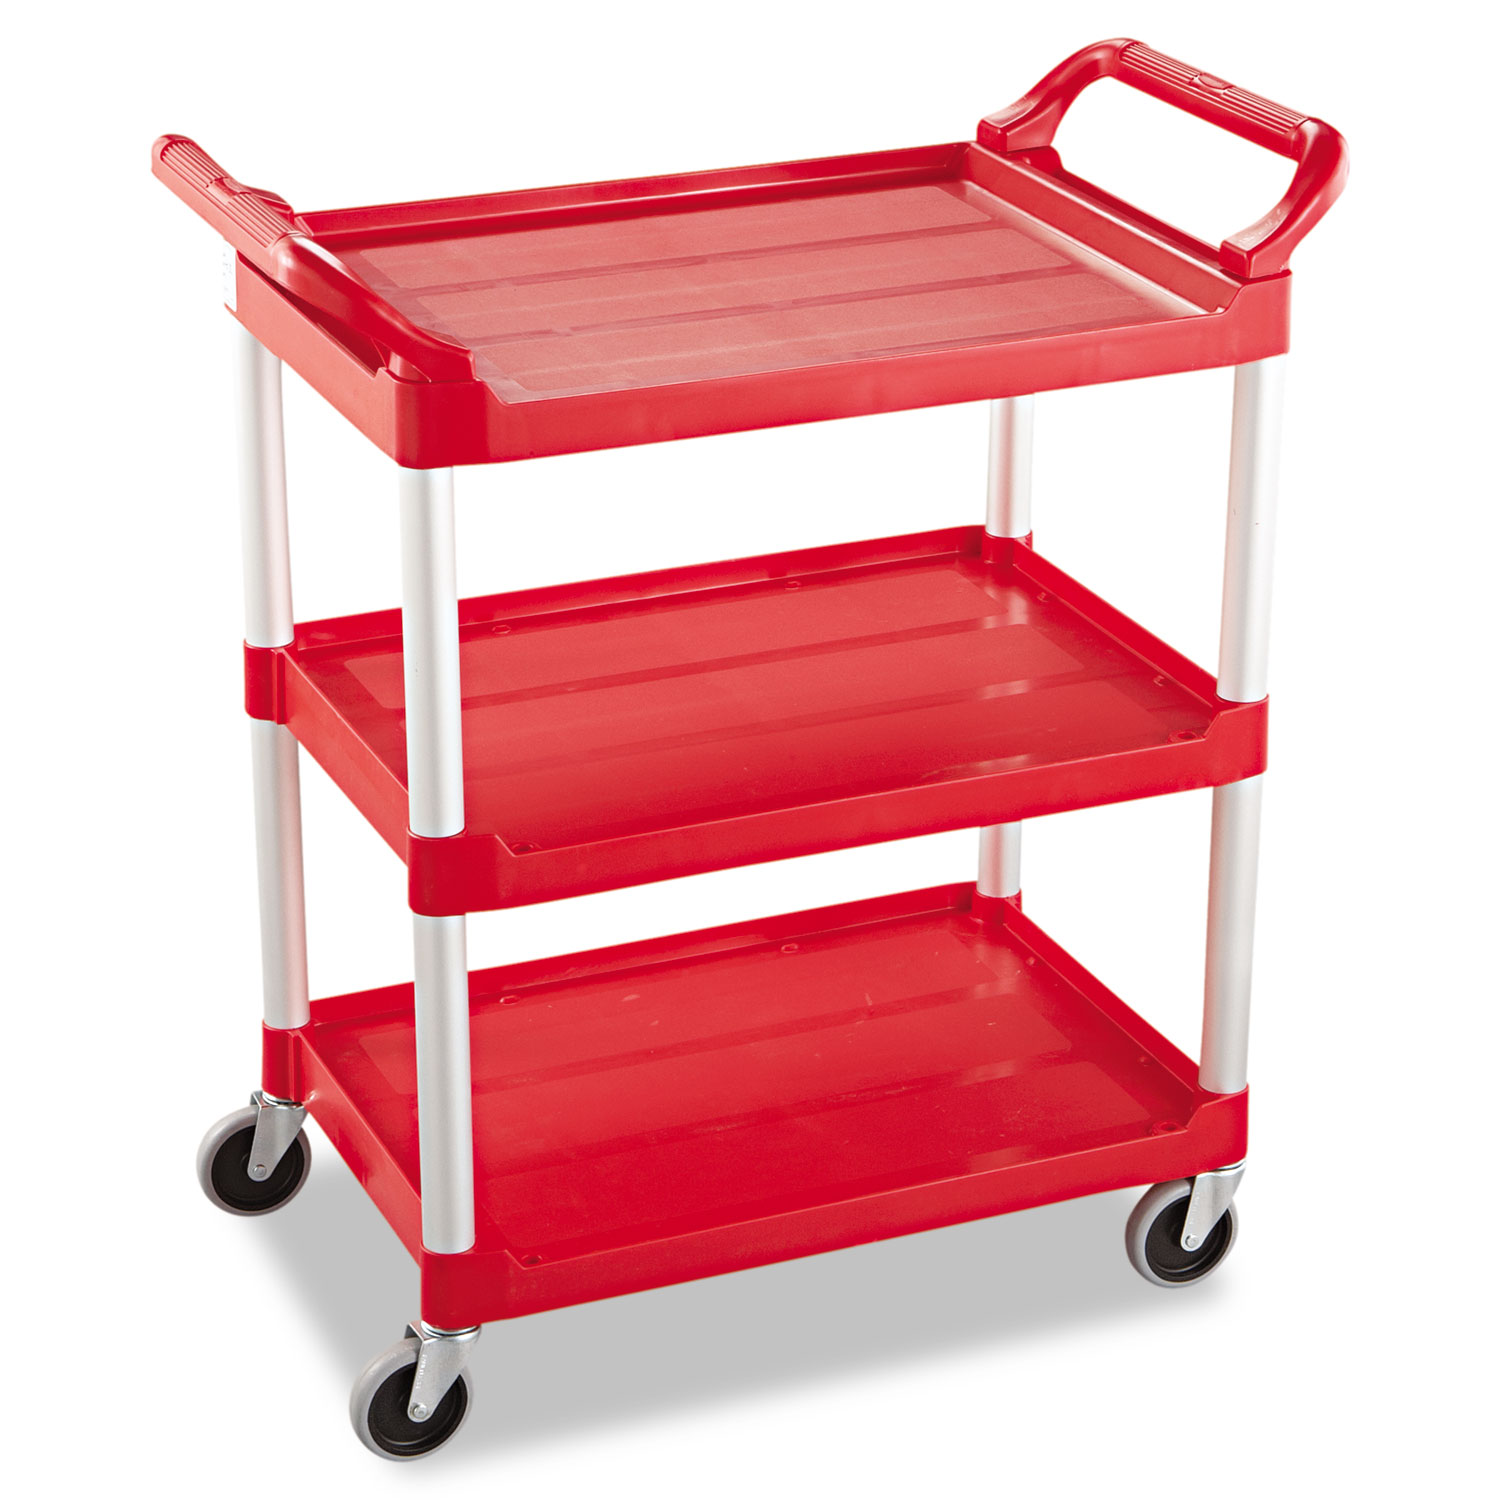  Rubbermaid Commercial 342488RED Service Cart, 200-lb Capacity, Three-Shelf, 18.63w x 33.63d x 37.75h, Red (RCP342488RED) 